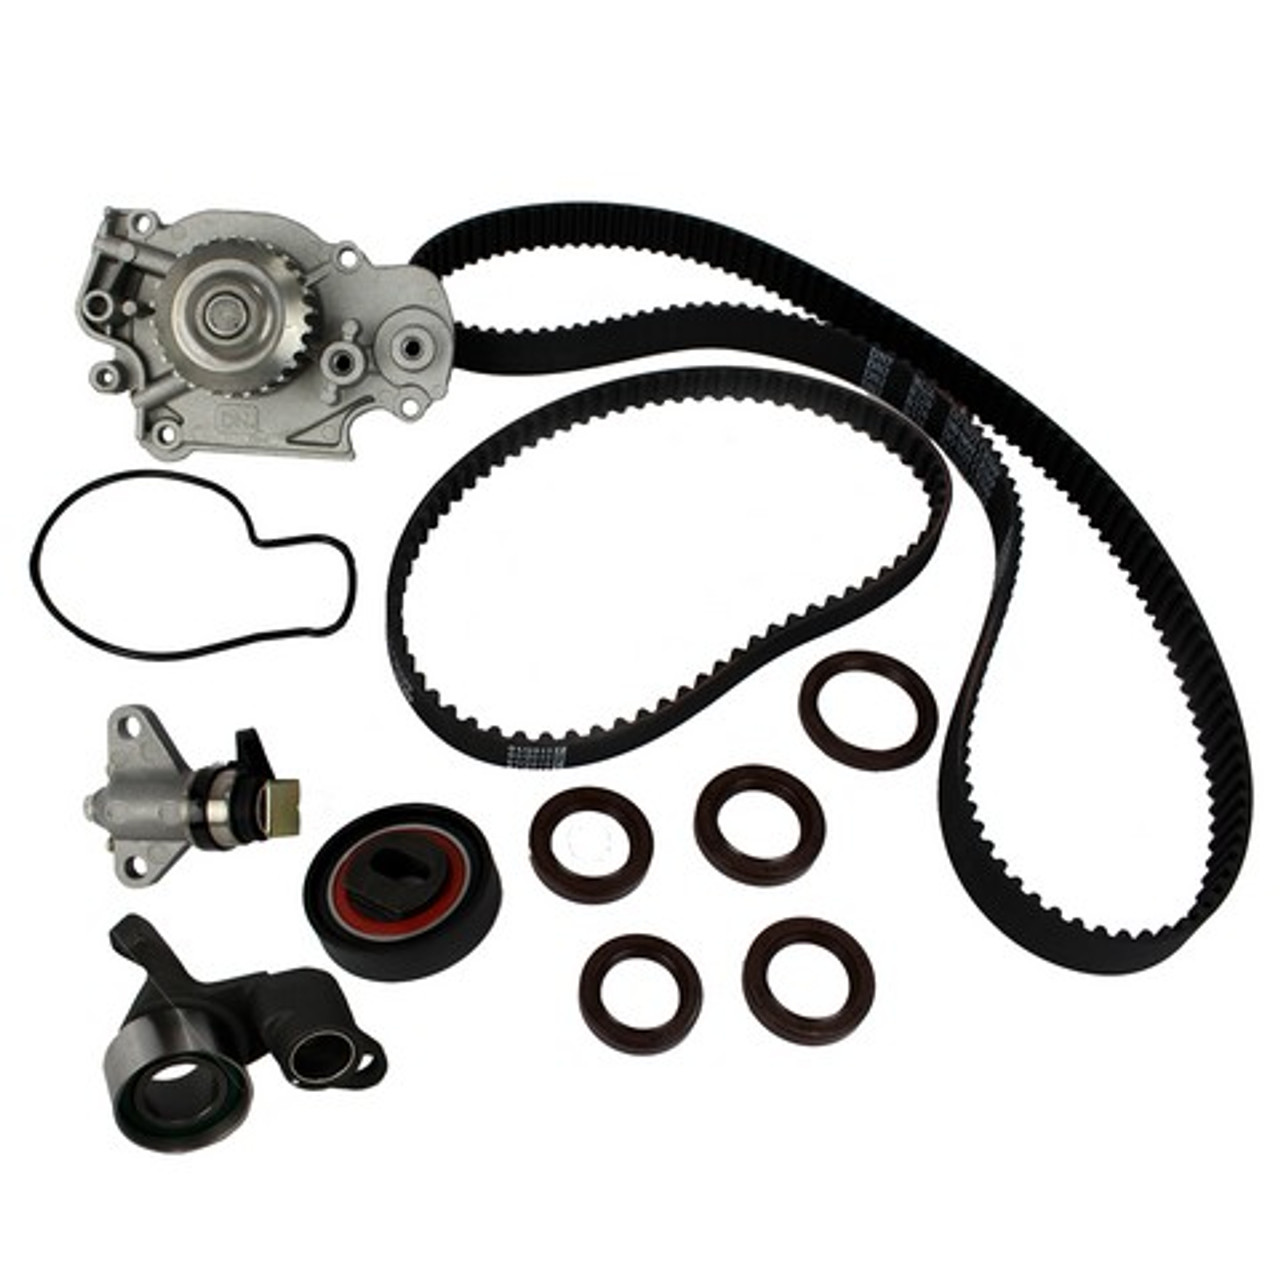 Timing Belt Kit with Water Pump 2.2L 1993 Honda Prelude - TBK223WP.1